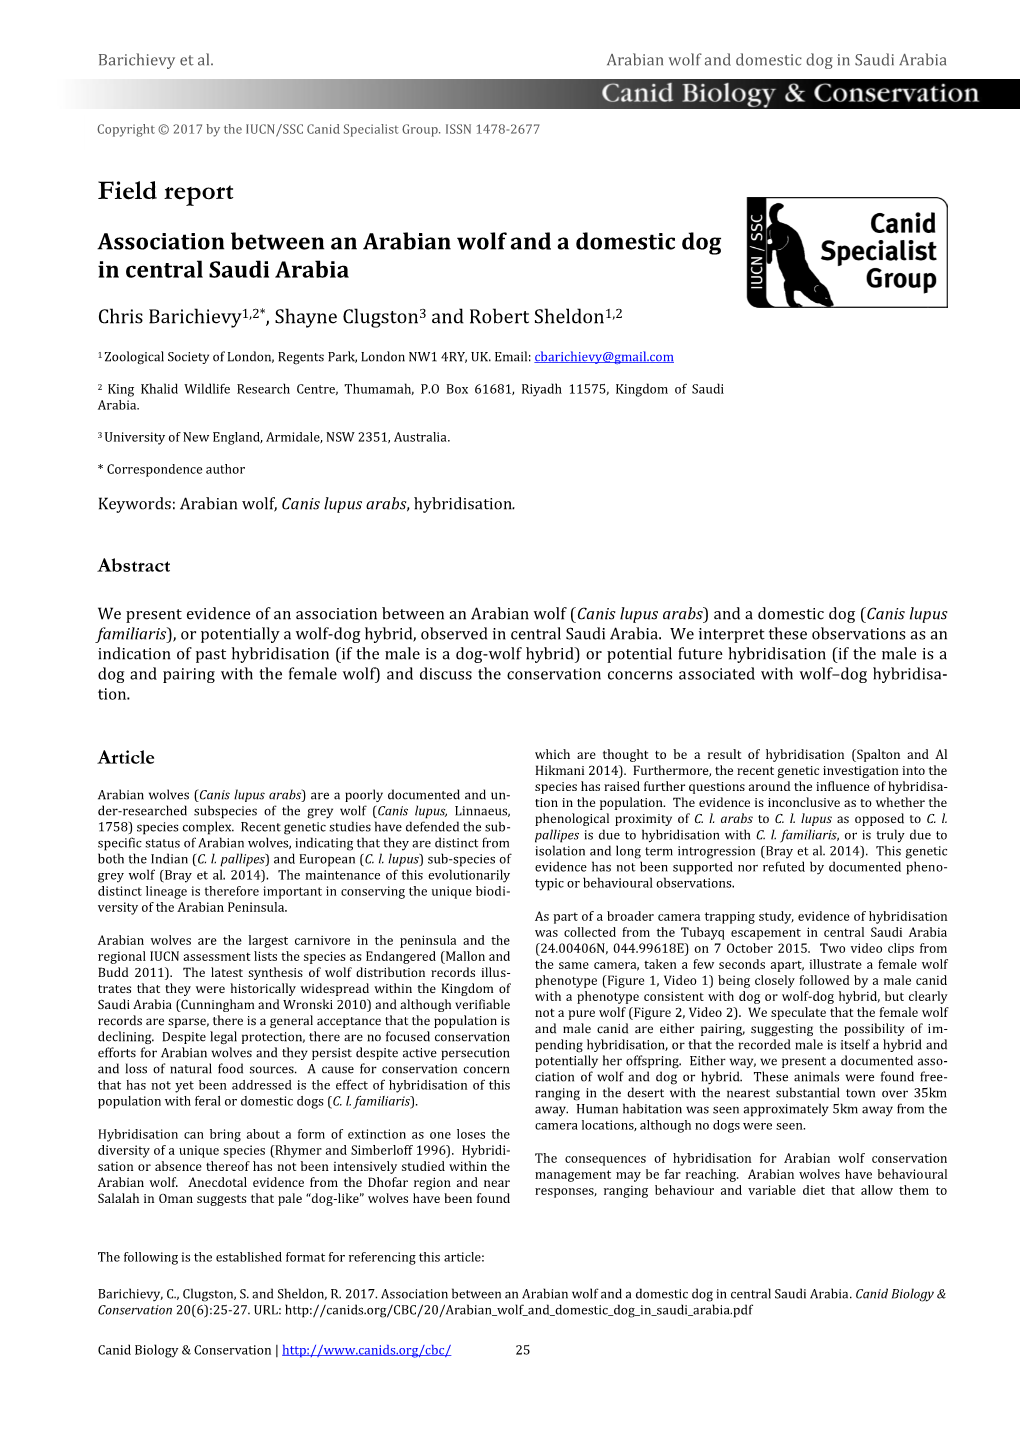 Association Between an Arabian Wolf and a Domestic Dog in Central Saudi Arabia